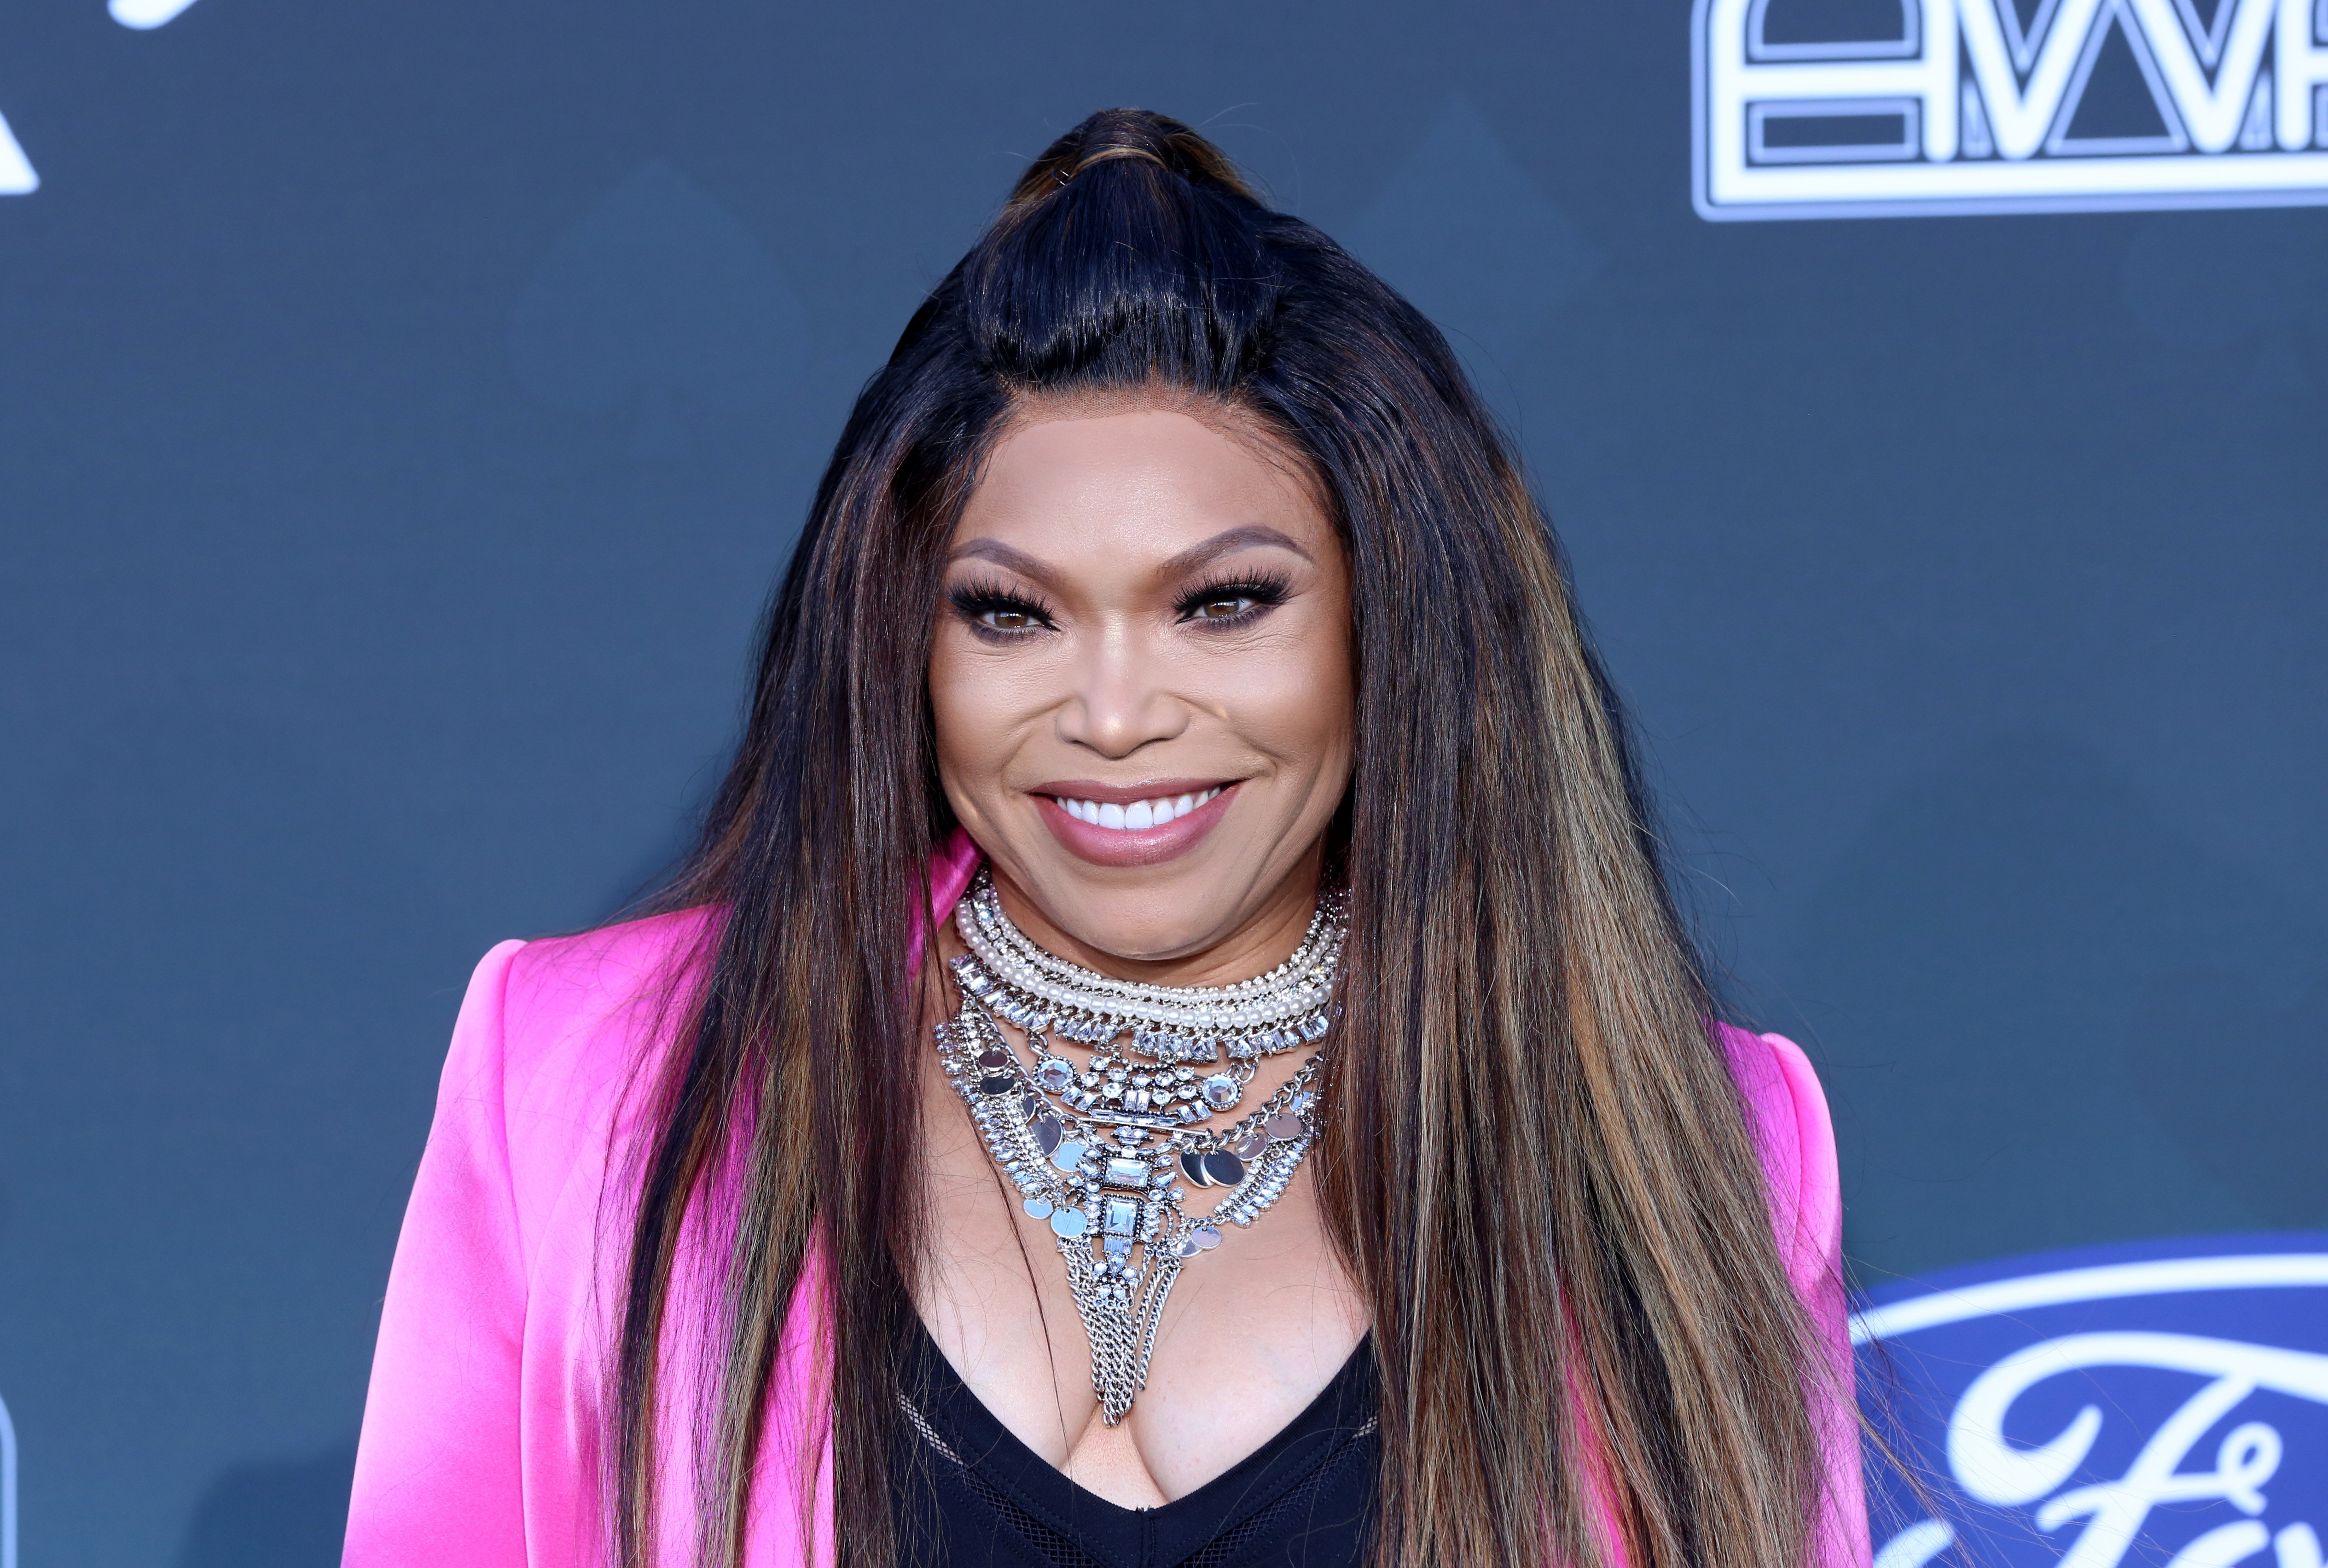 Tisha Campbell attends the 2019 Soul Train Awards at the Orleans Arena on November 17, 2019 in Las Vegas, Nevada. | Photo: GettyImages